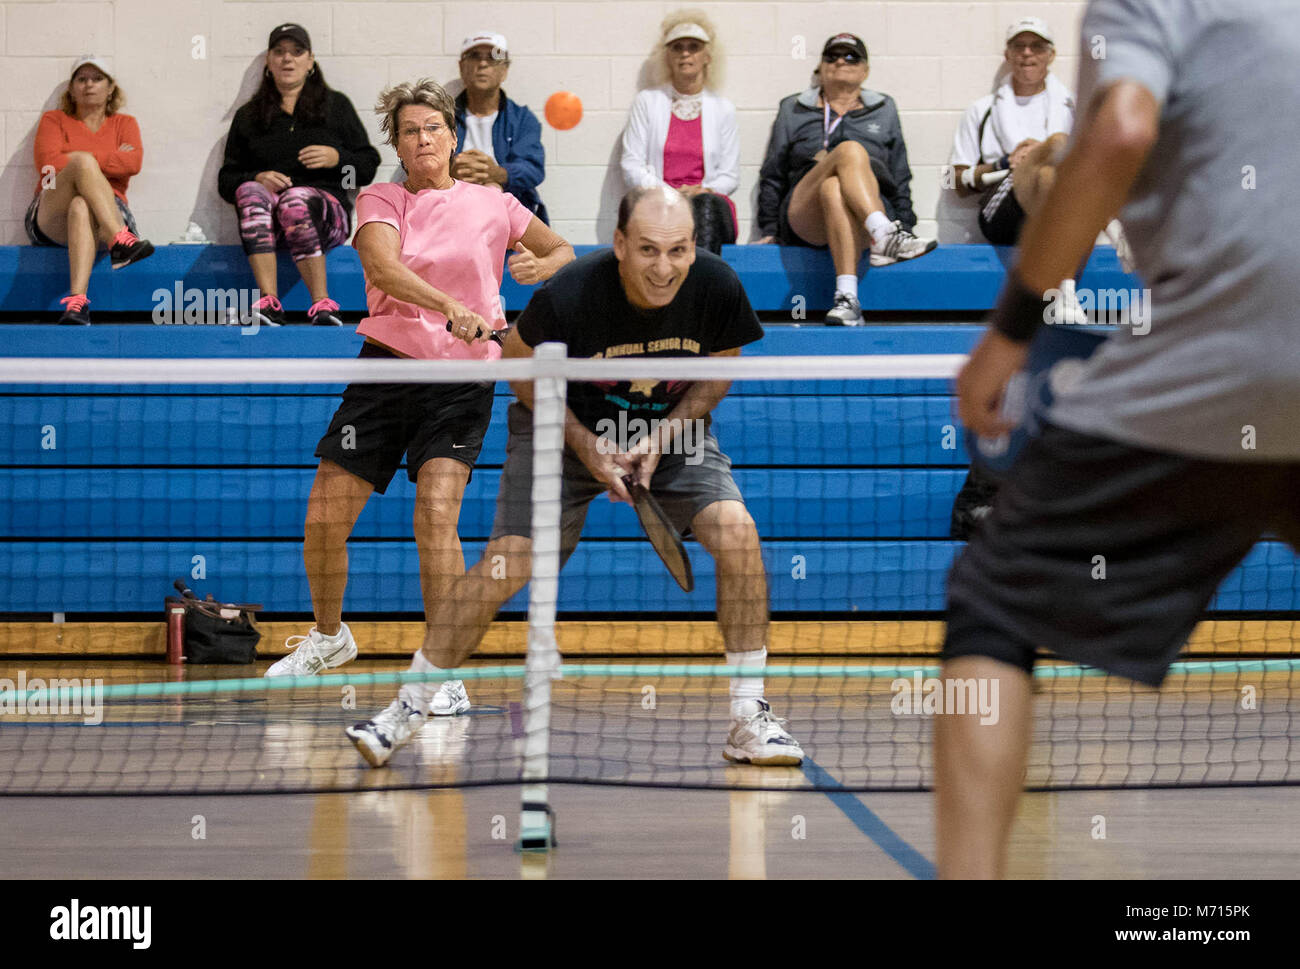 Delray Beach, Florida, USA. 7th Mar, 2018. Pam Garcia, Boynton Beach, returns a shot over her partner, Julian Gershaw, Delray Beach, during the Gold Medal pickleball match (60-64) in mixed doubles at the 29th Annual Delray Beach Senior Games at Pompey Park in Delray Beach, Florida on March 7, 2018. Garcia and Gershaw won Silver medals falling in a tiebreaker match to Masi Jacobs, Jensen Beach, and Sheridan Collins, Stuart. Nearly 200 seniors participated in the week long games that included track and field, bowling, powerlifting, swimming, golf, croquet, billiards, basketball and archery. M Stock Photo